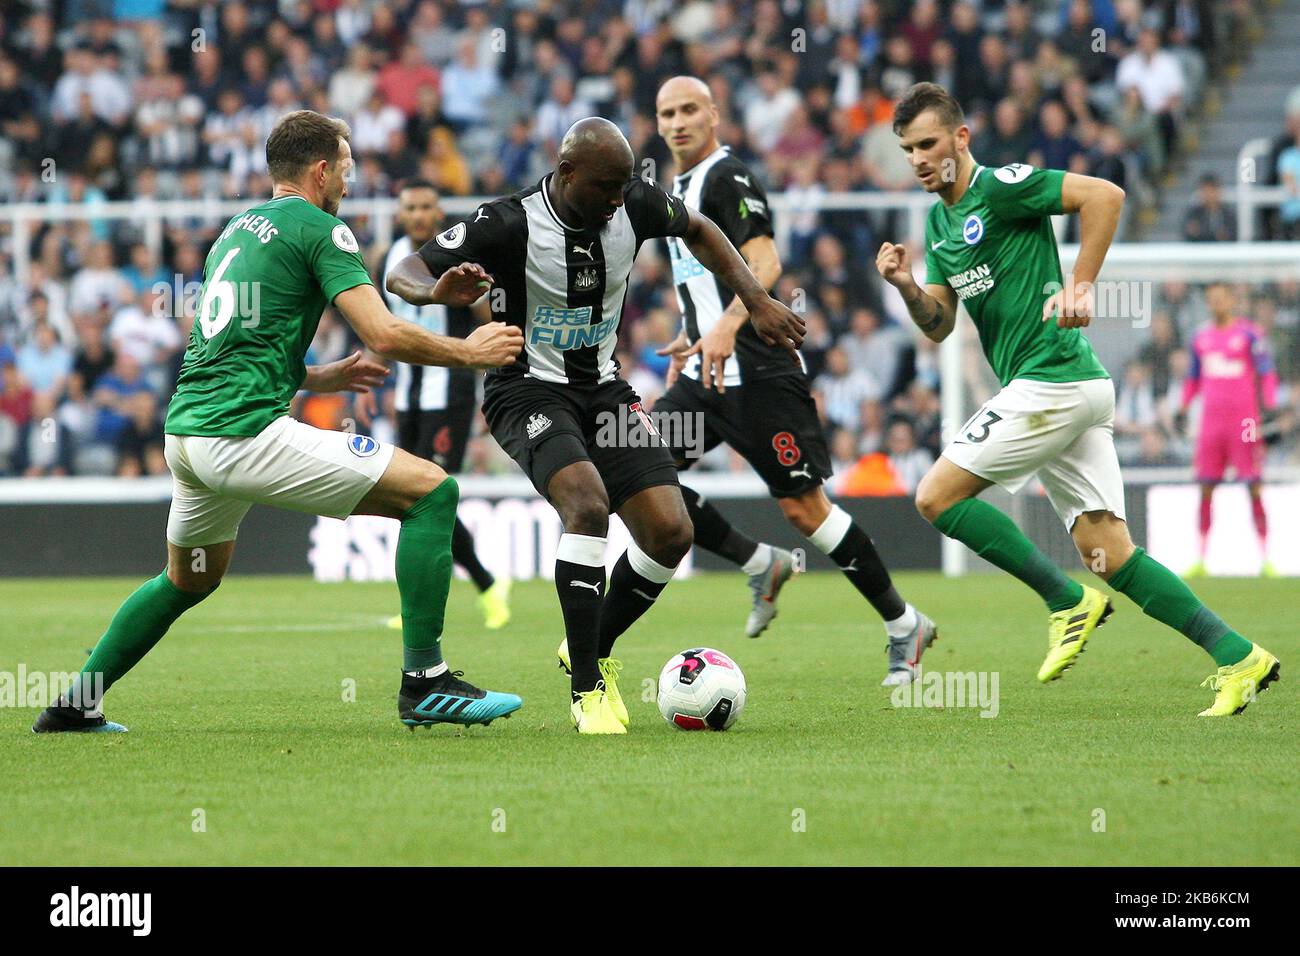 Newcastle United's Jetro Willems competes for the ball with Brighton & Hove Albion's Dale Stephens during the Premier League match between Newcastle United and Brighton and Hove Albion at St. James's Park, Newcastle on Saturday 21st September 2019. (Photo by Steven Hadlow/MI News/NurPhoto) Stock Photo